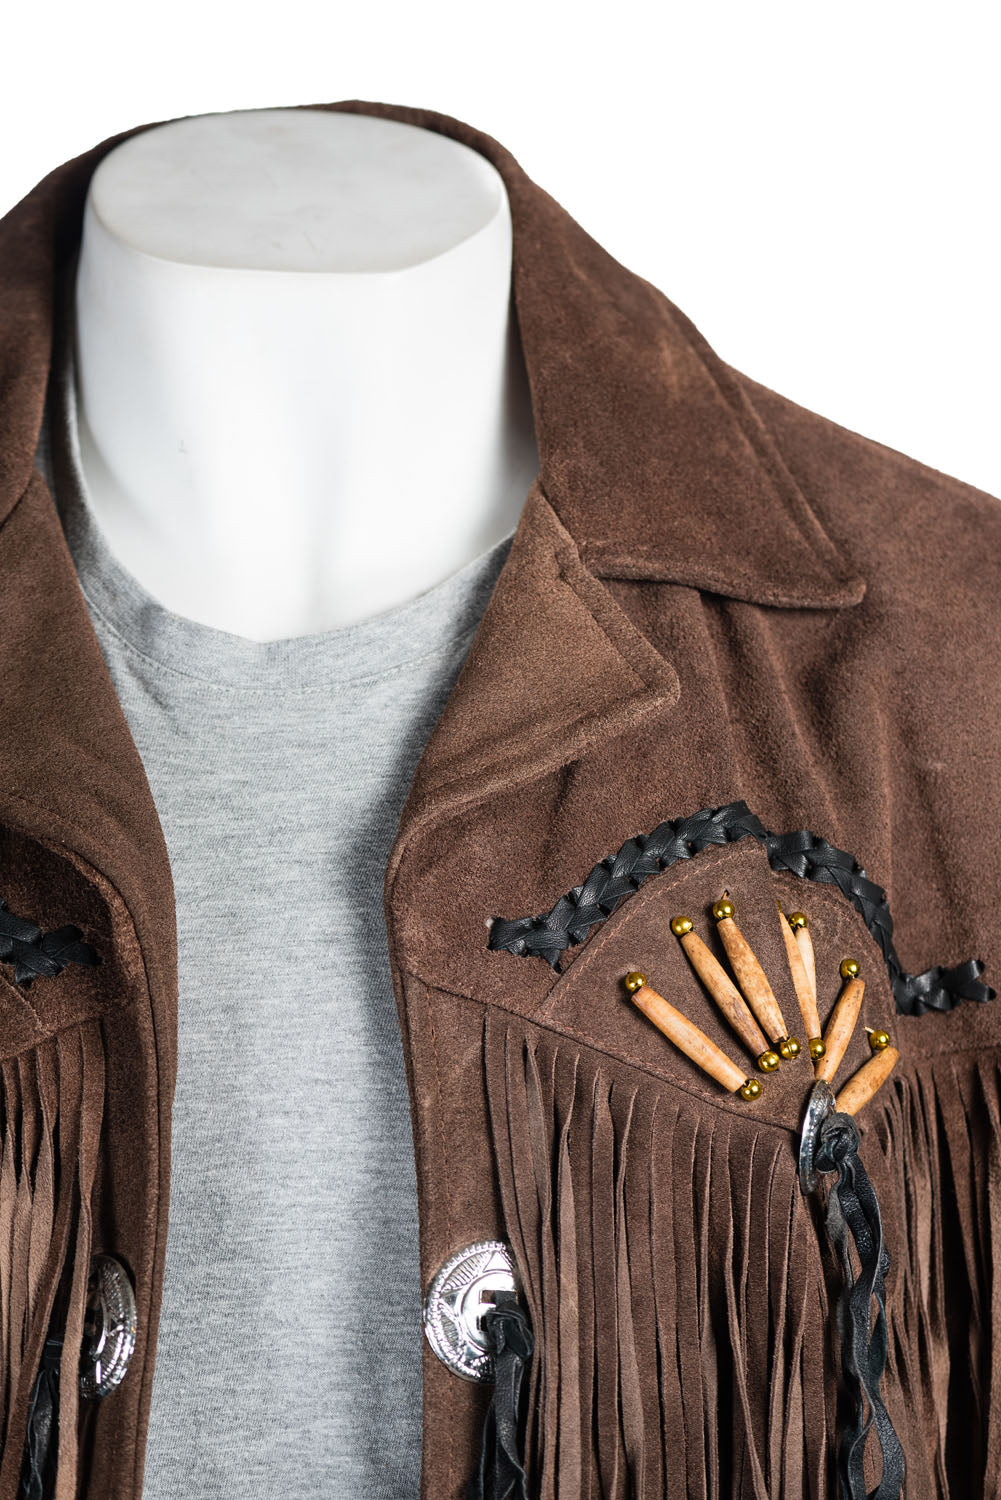 Men's Brown Suede Native American Western Style Jacket with Fringe and Beads - Navajo Men's